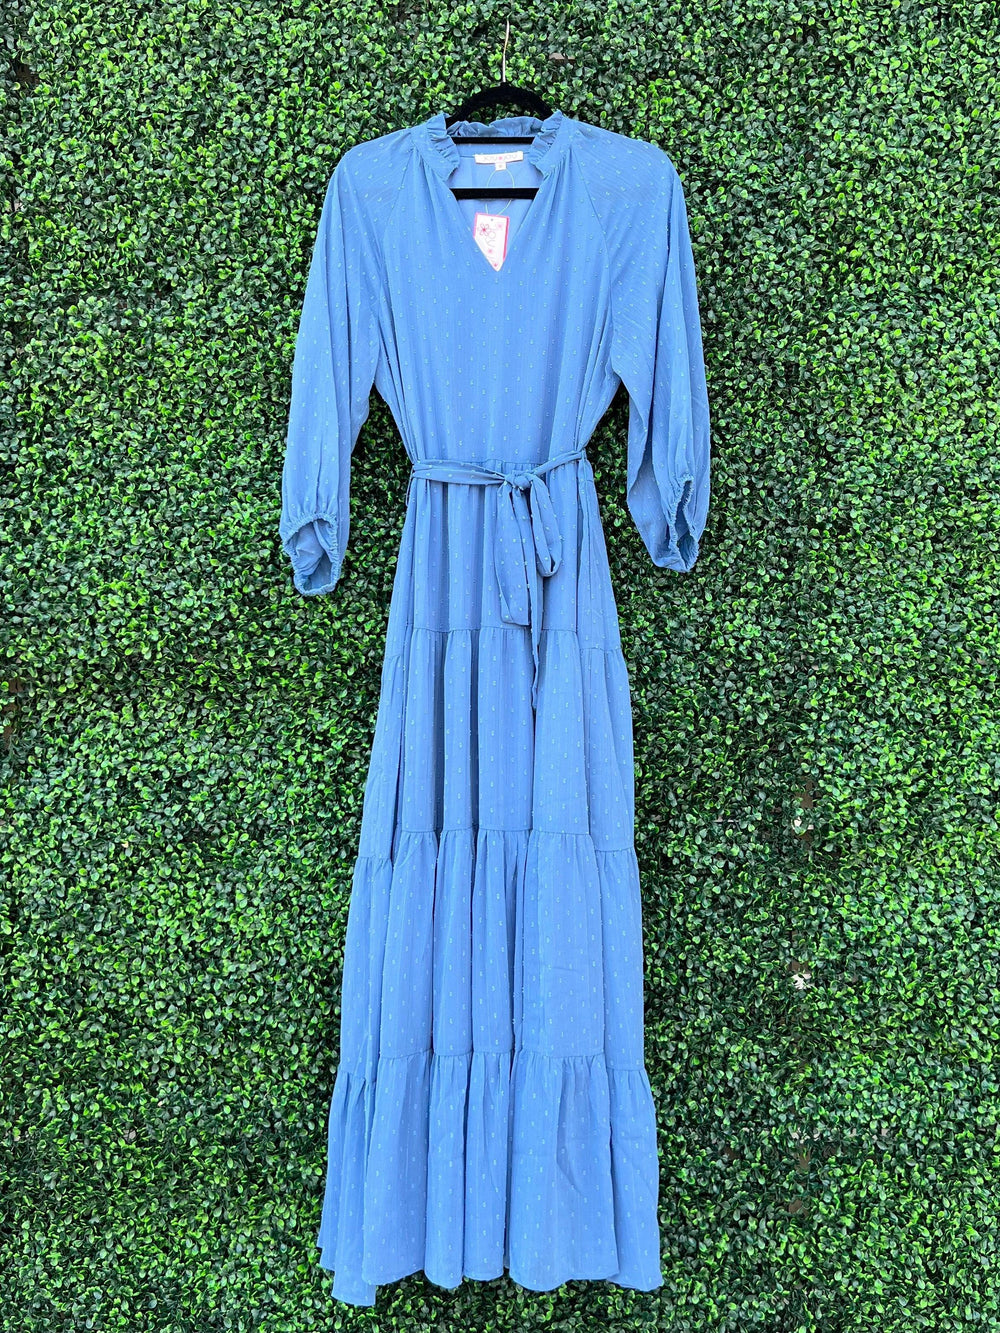 Light blue mmaxi dress with sheer sleeves in boutique serving downtown houston area 